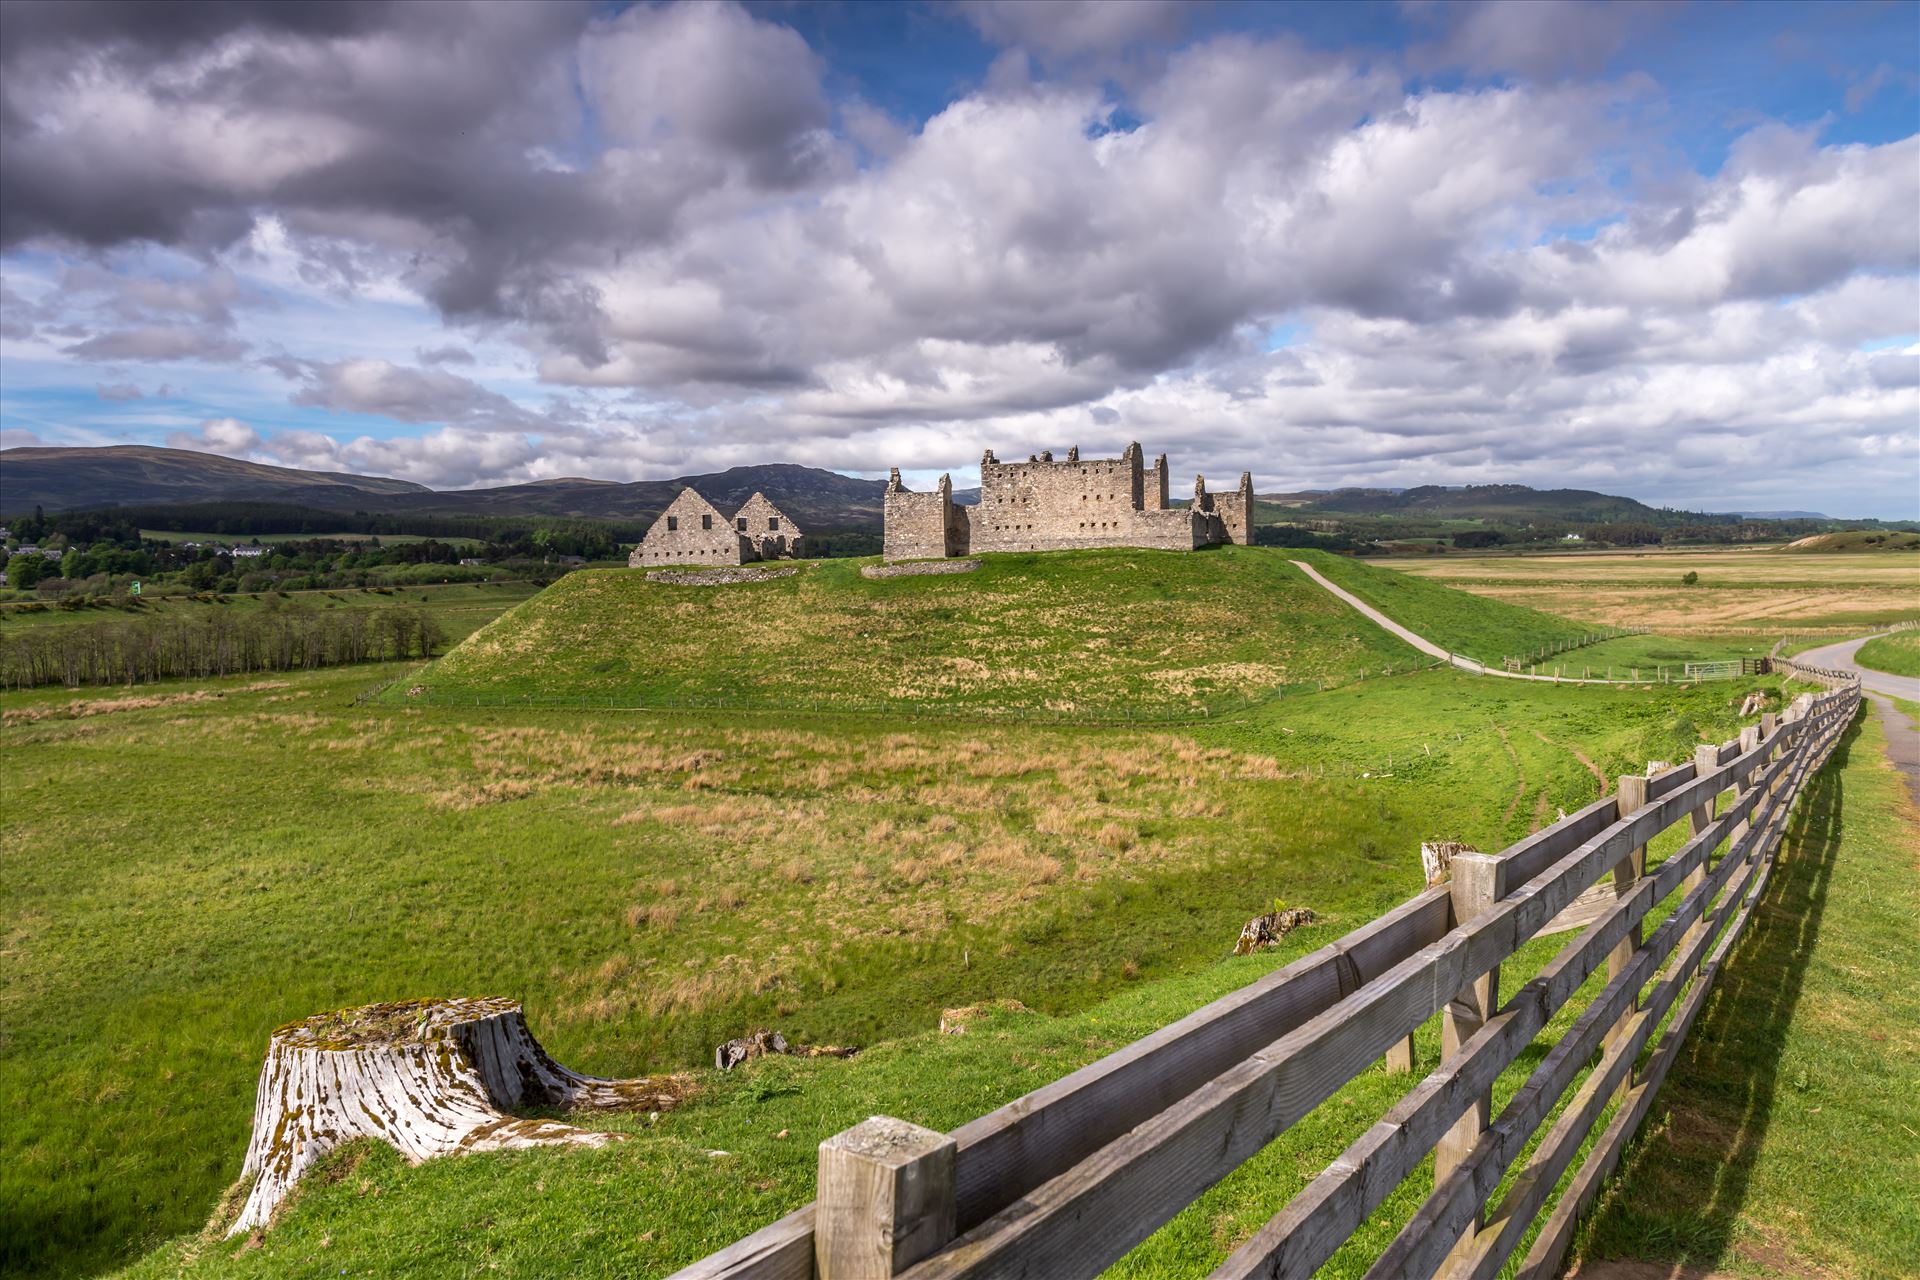 Ruthven Barracks - Ruthven Barracks, near Ruthven in Badenoch, Scotland, are the smallest but best preserved of the four barracks built in 1719 after the 1715 Jacobite rising. by philreay